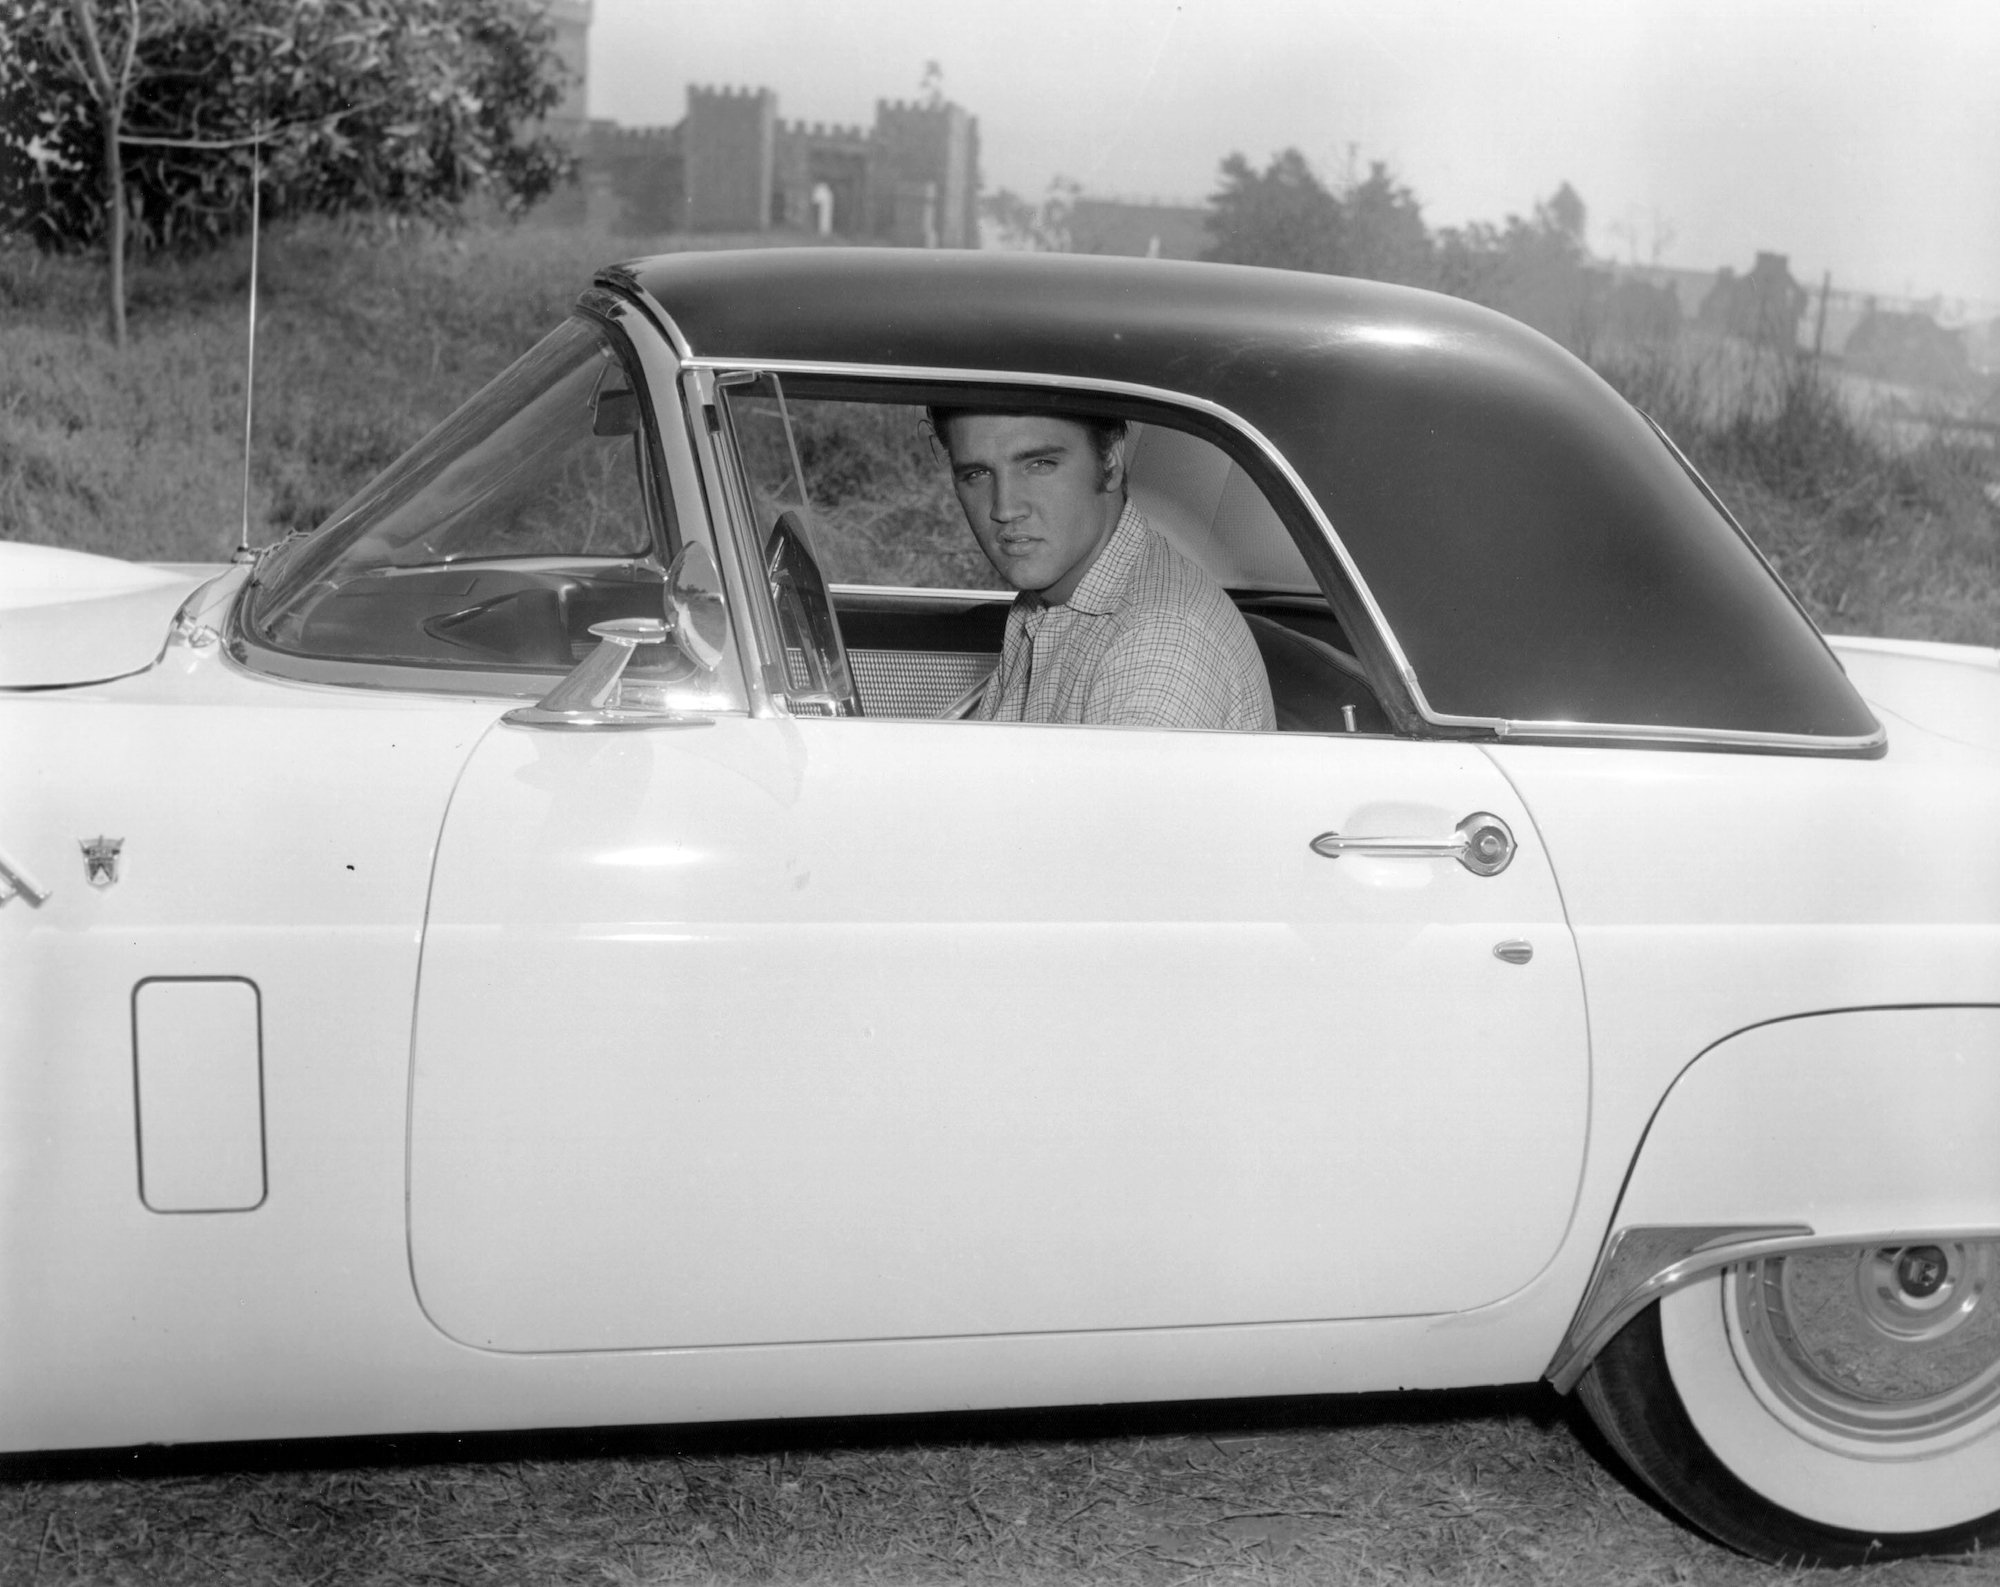 Elvis sitting in his car, looking out the driver's side window